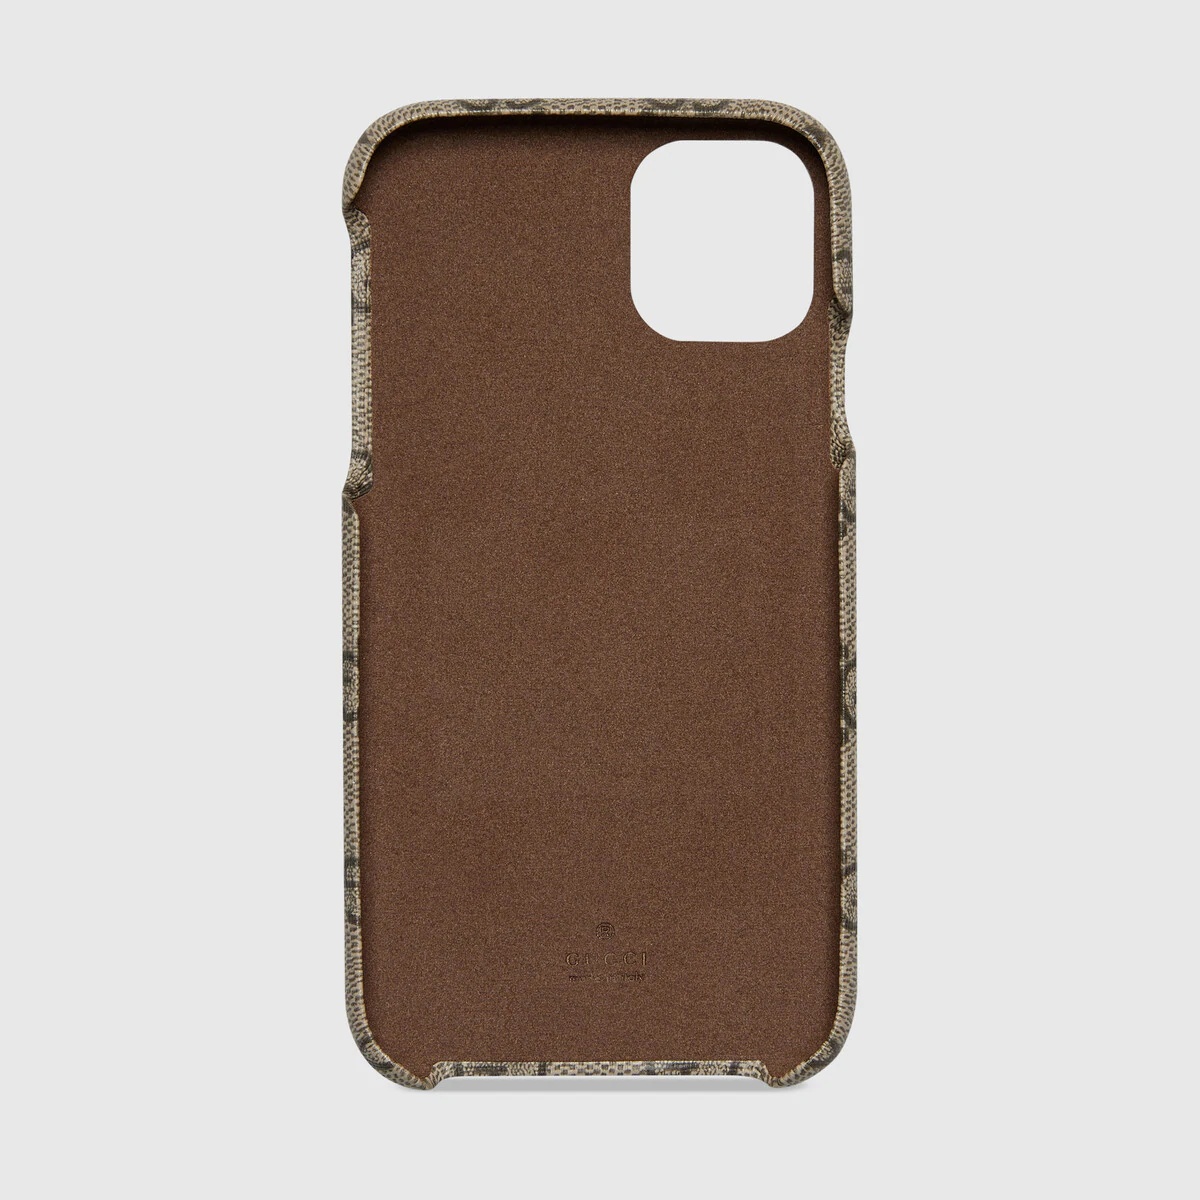 Ophidia case for iPhone 11 - 2